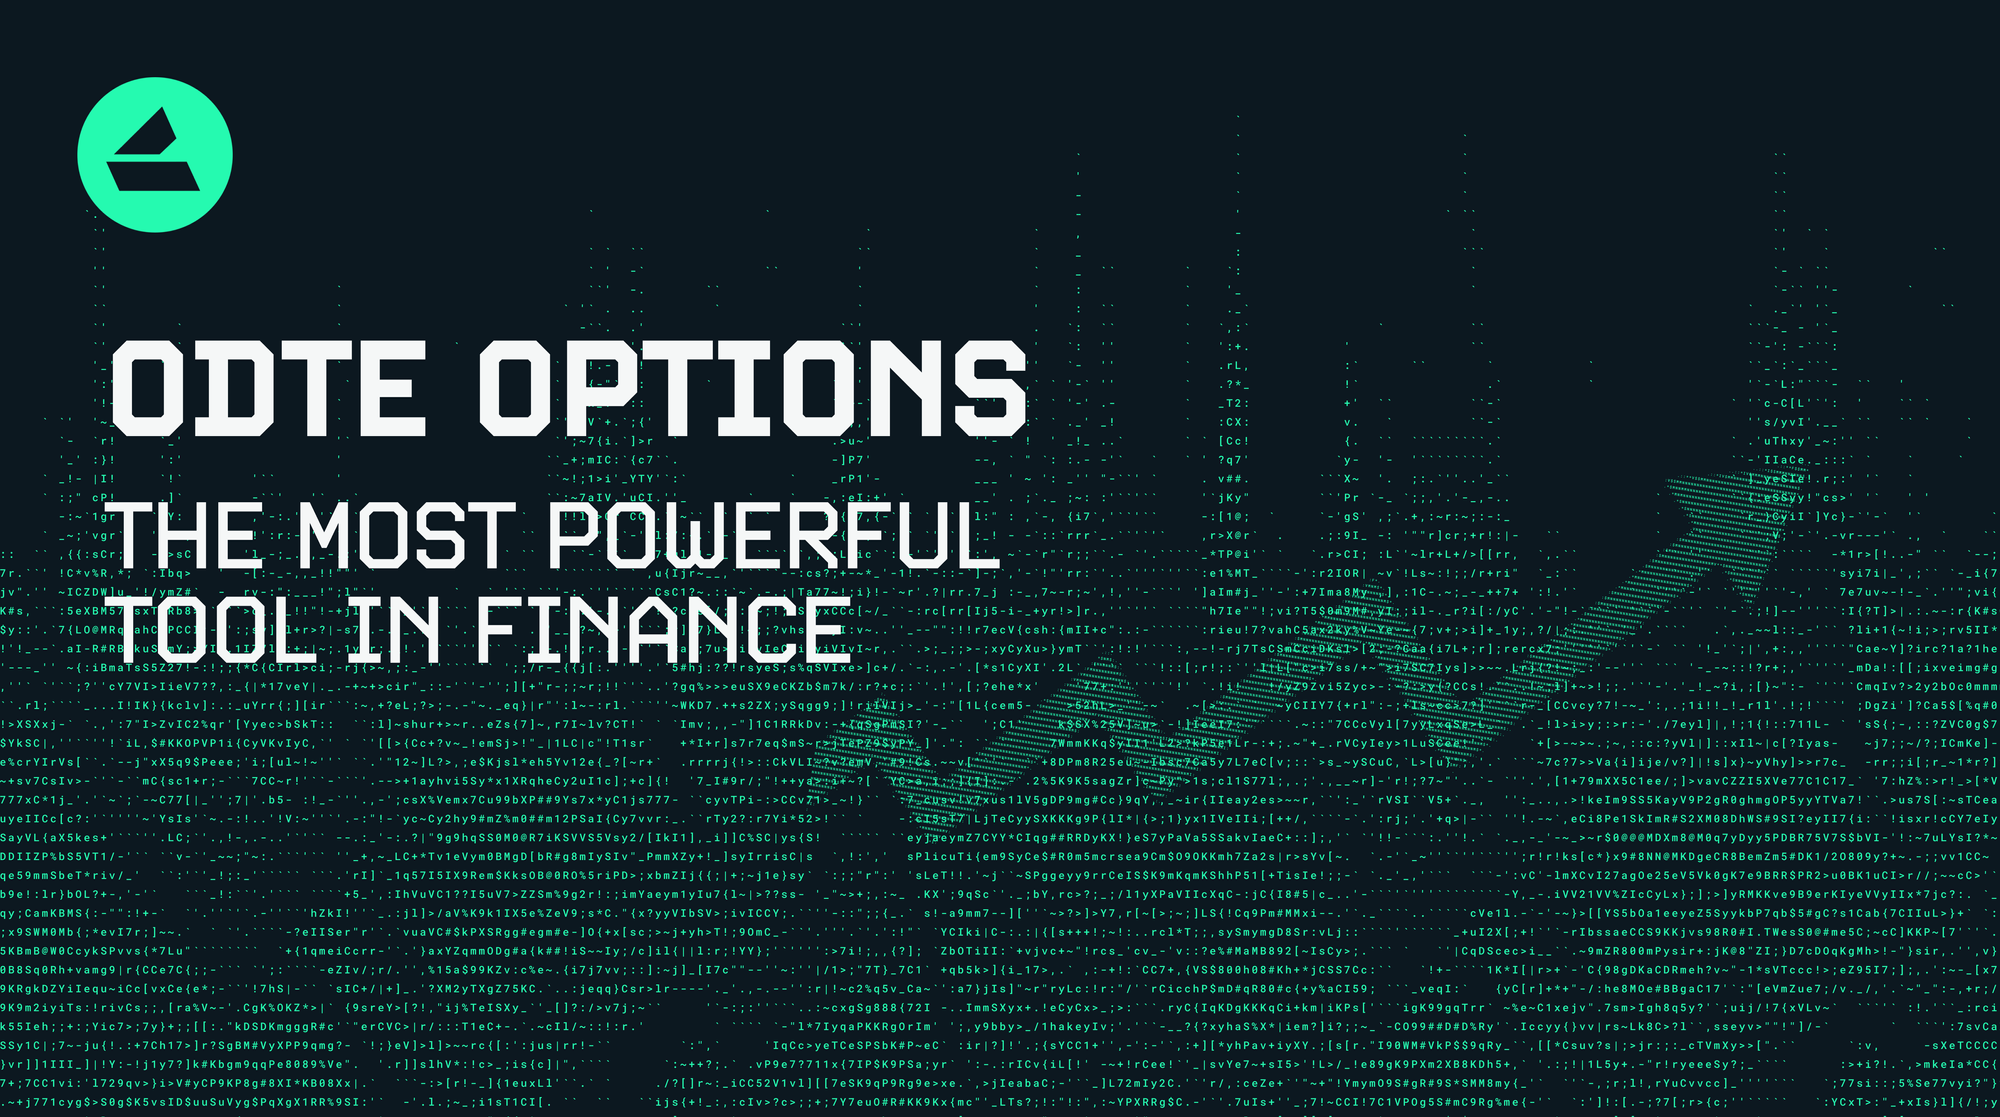 0DTE Options: The Most Powerful Tool in Finance